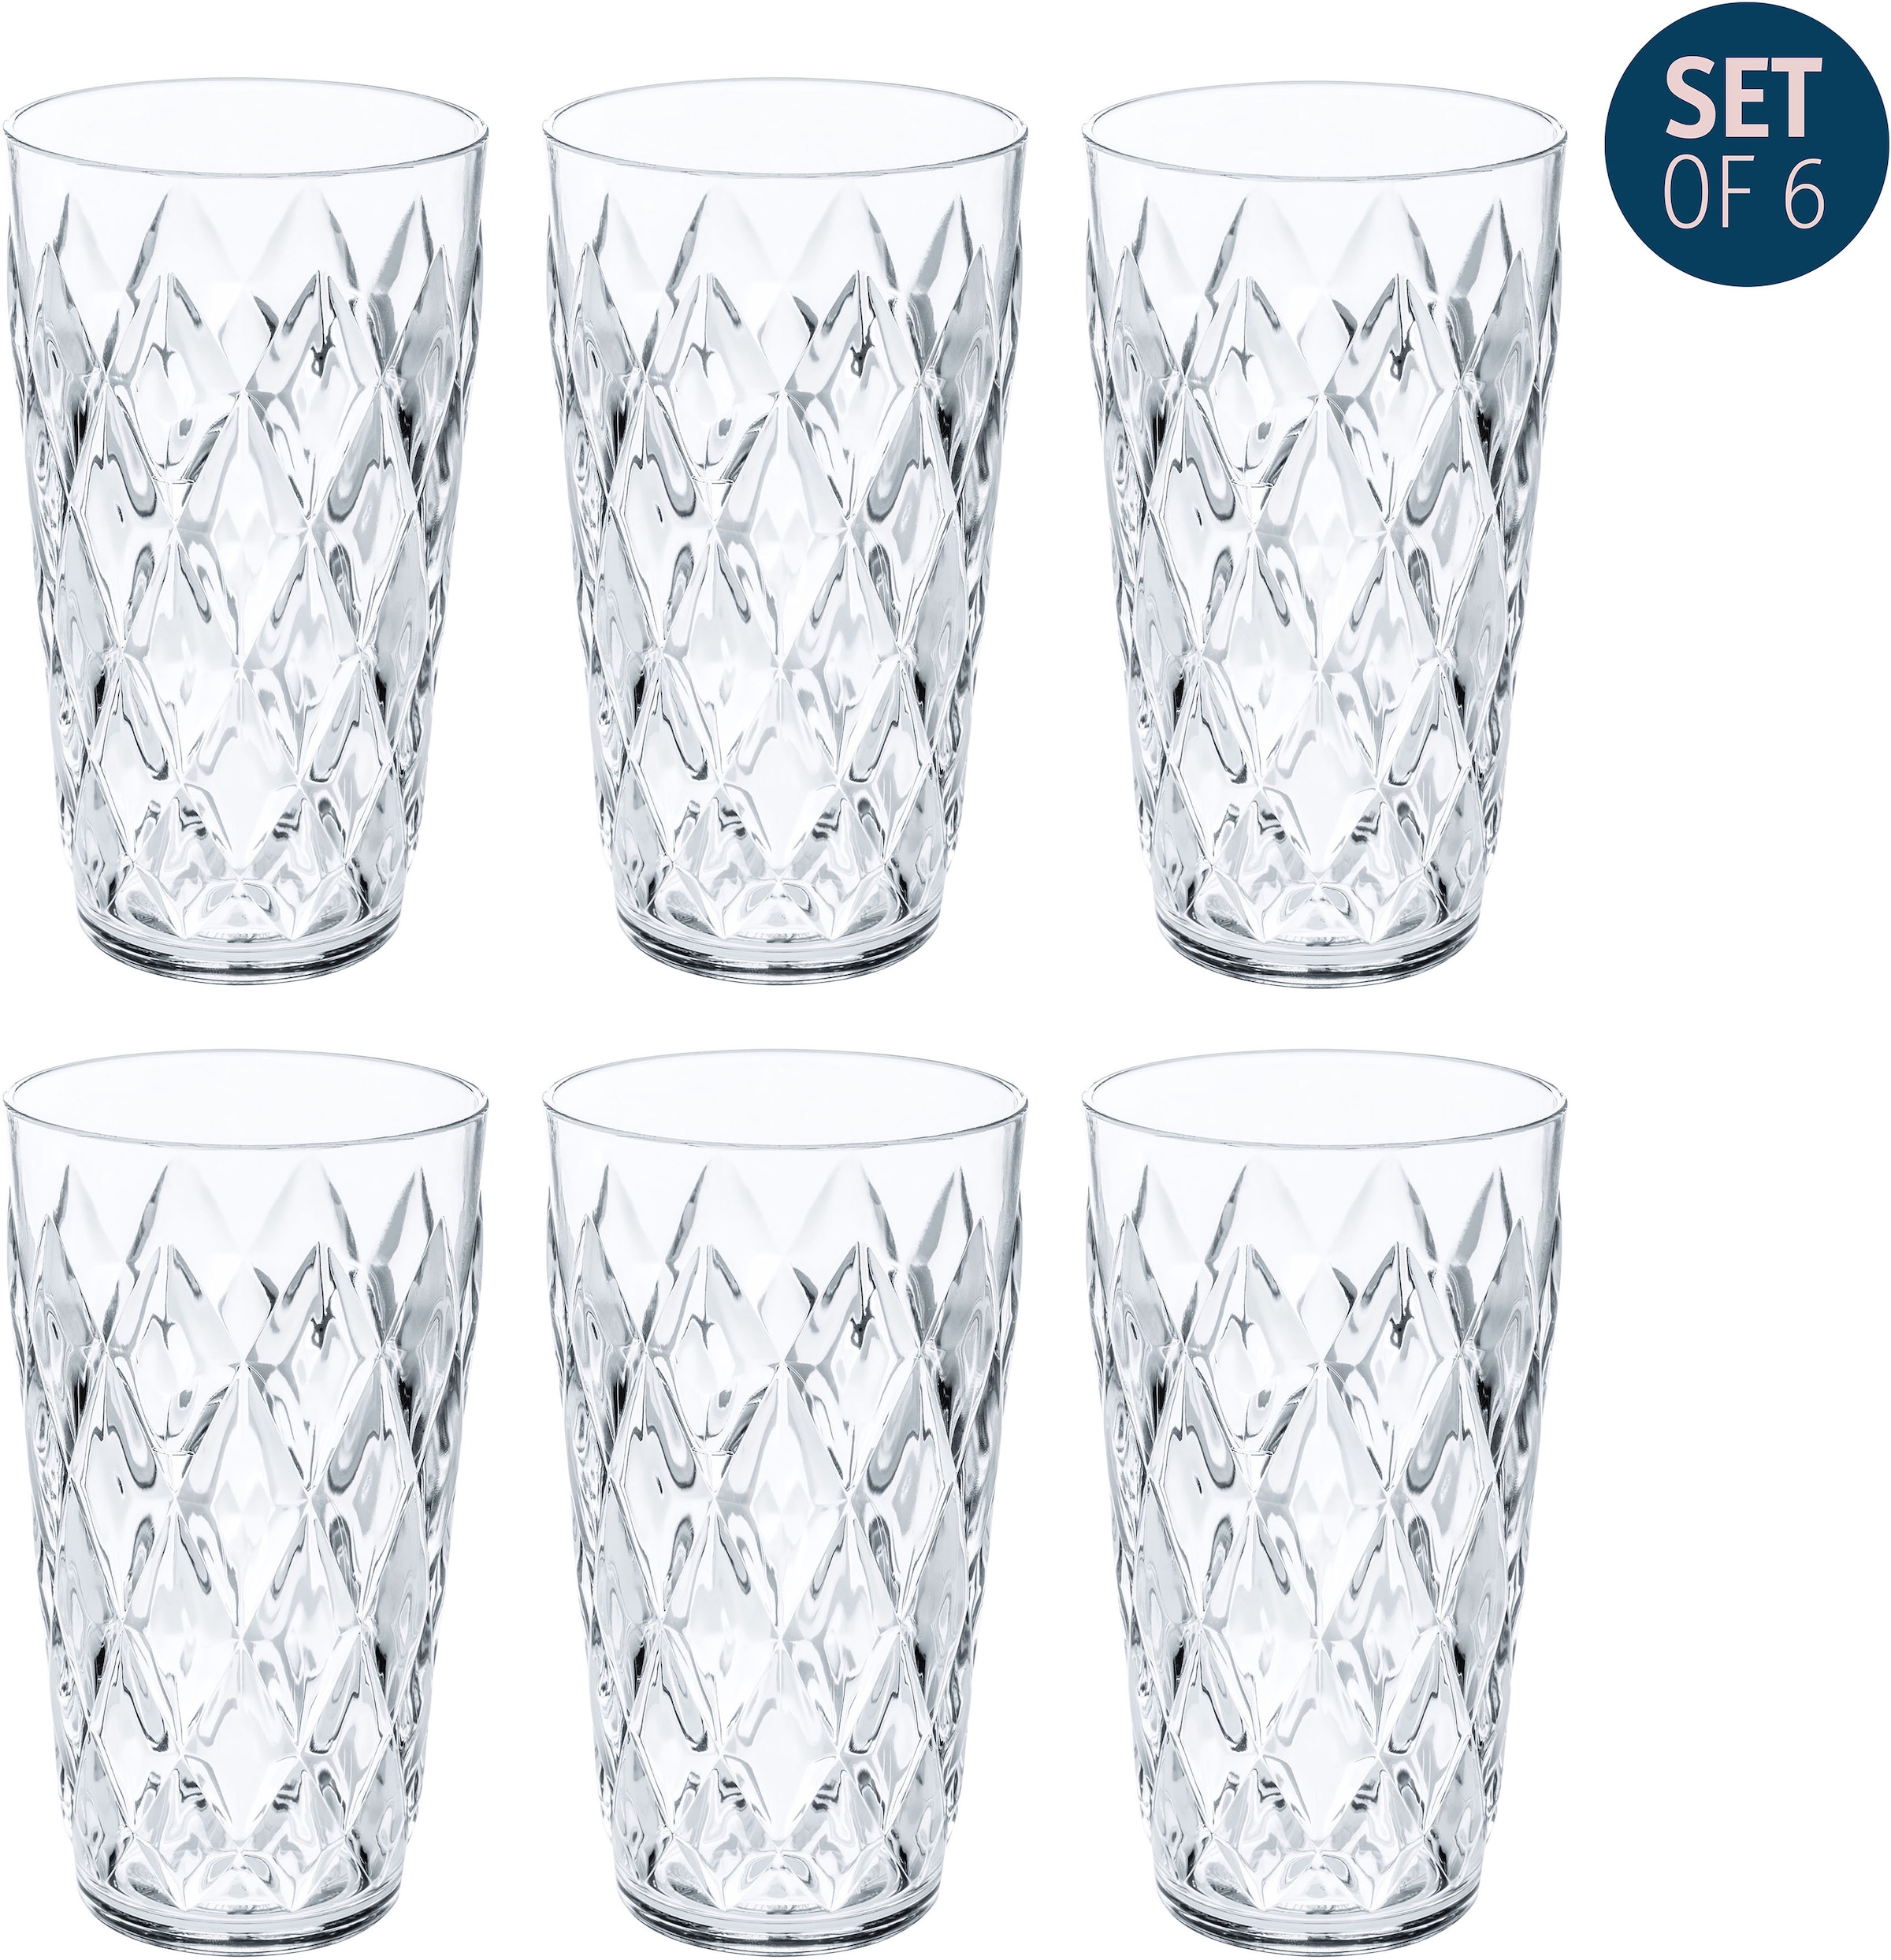 KOZIOL Gläser-Set »CHEERS No. 1 PARTY«, (Set, 6 tlg.), recycelbar, made in Germany, CO2 neutrale Produktion, 450 ml, 4-teilig